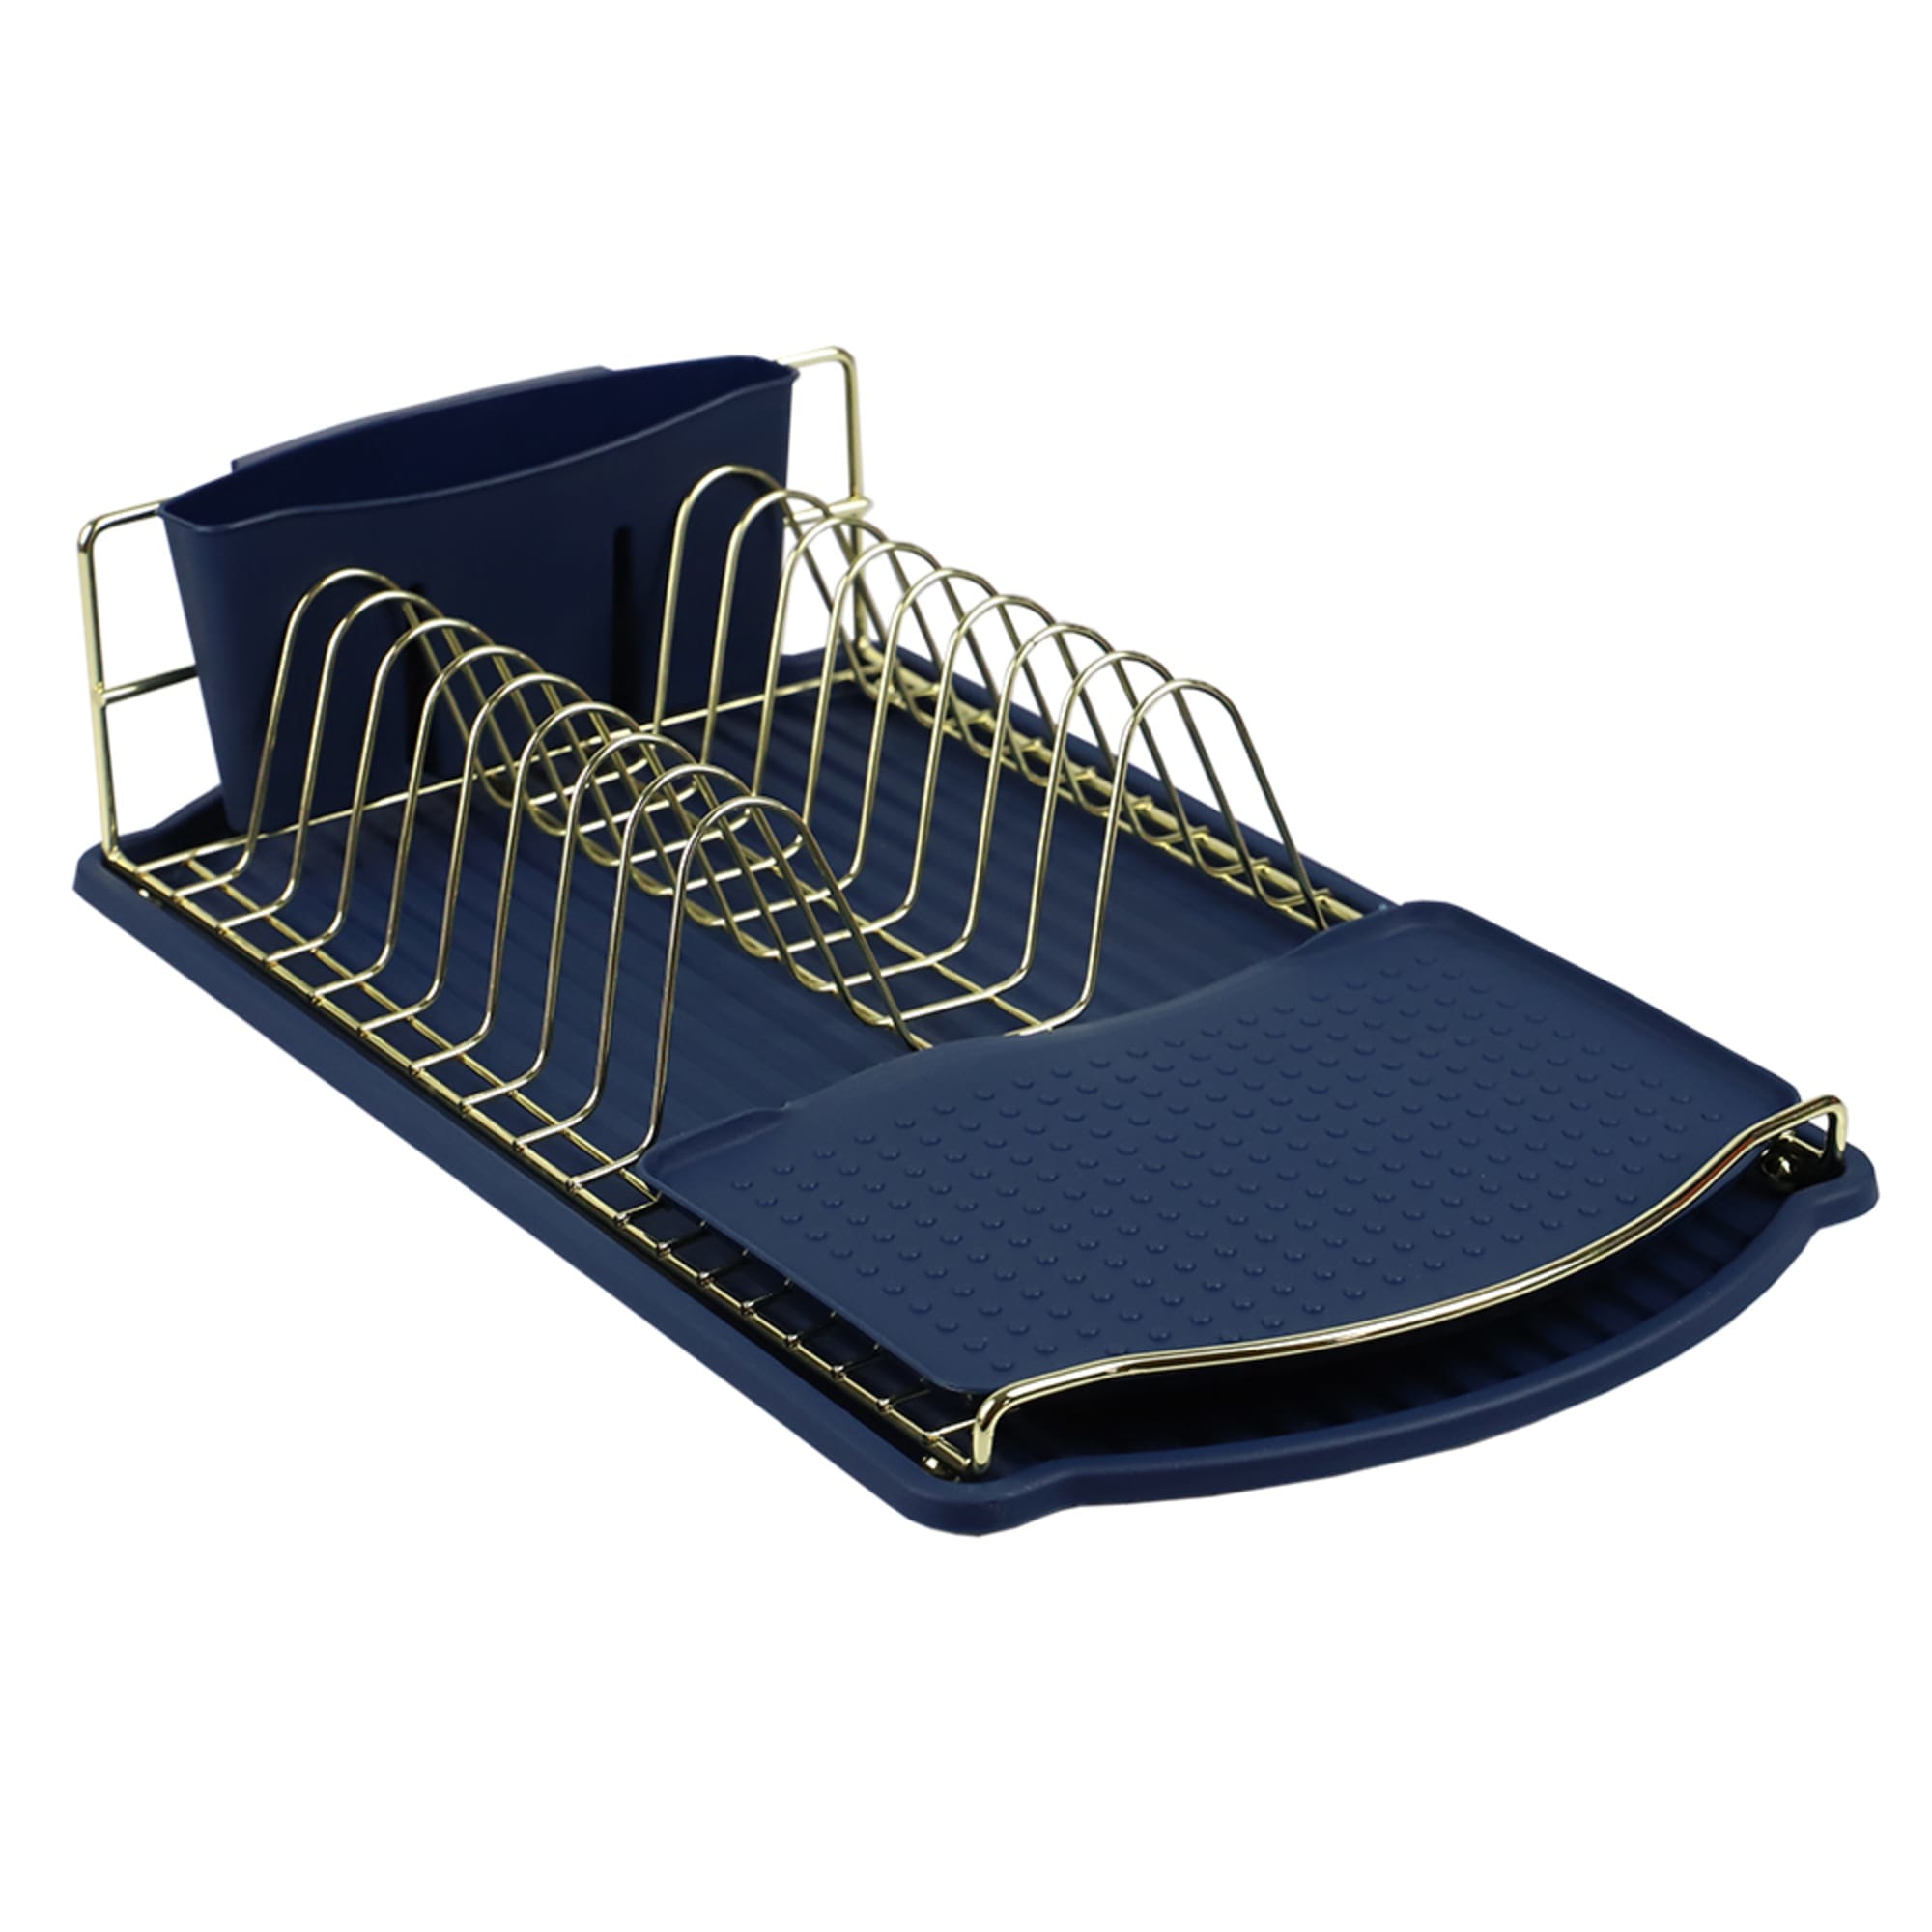 Michael Graves Design Gold Finish Steel Wire Compact Dish Rack with Oversized Utensil Holder, Indigo $12.00 EACH, CASE PACK OF 6